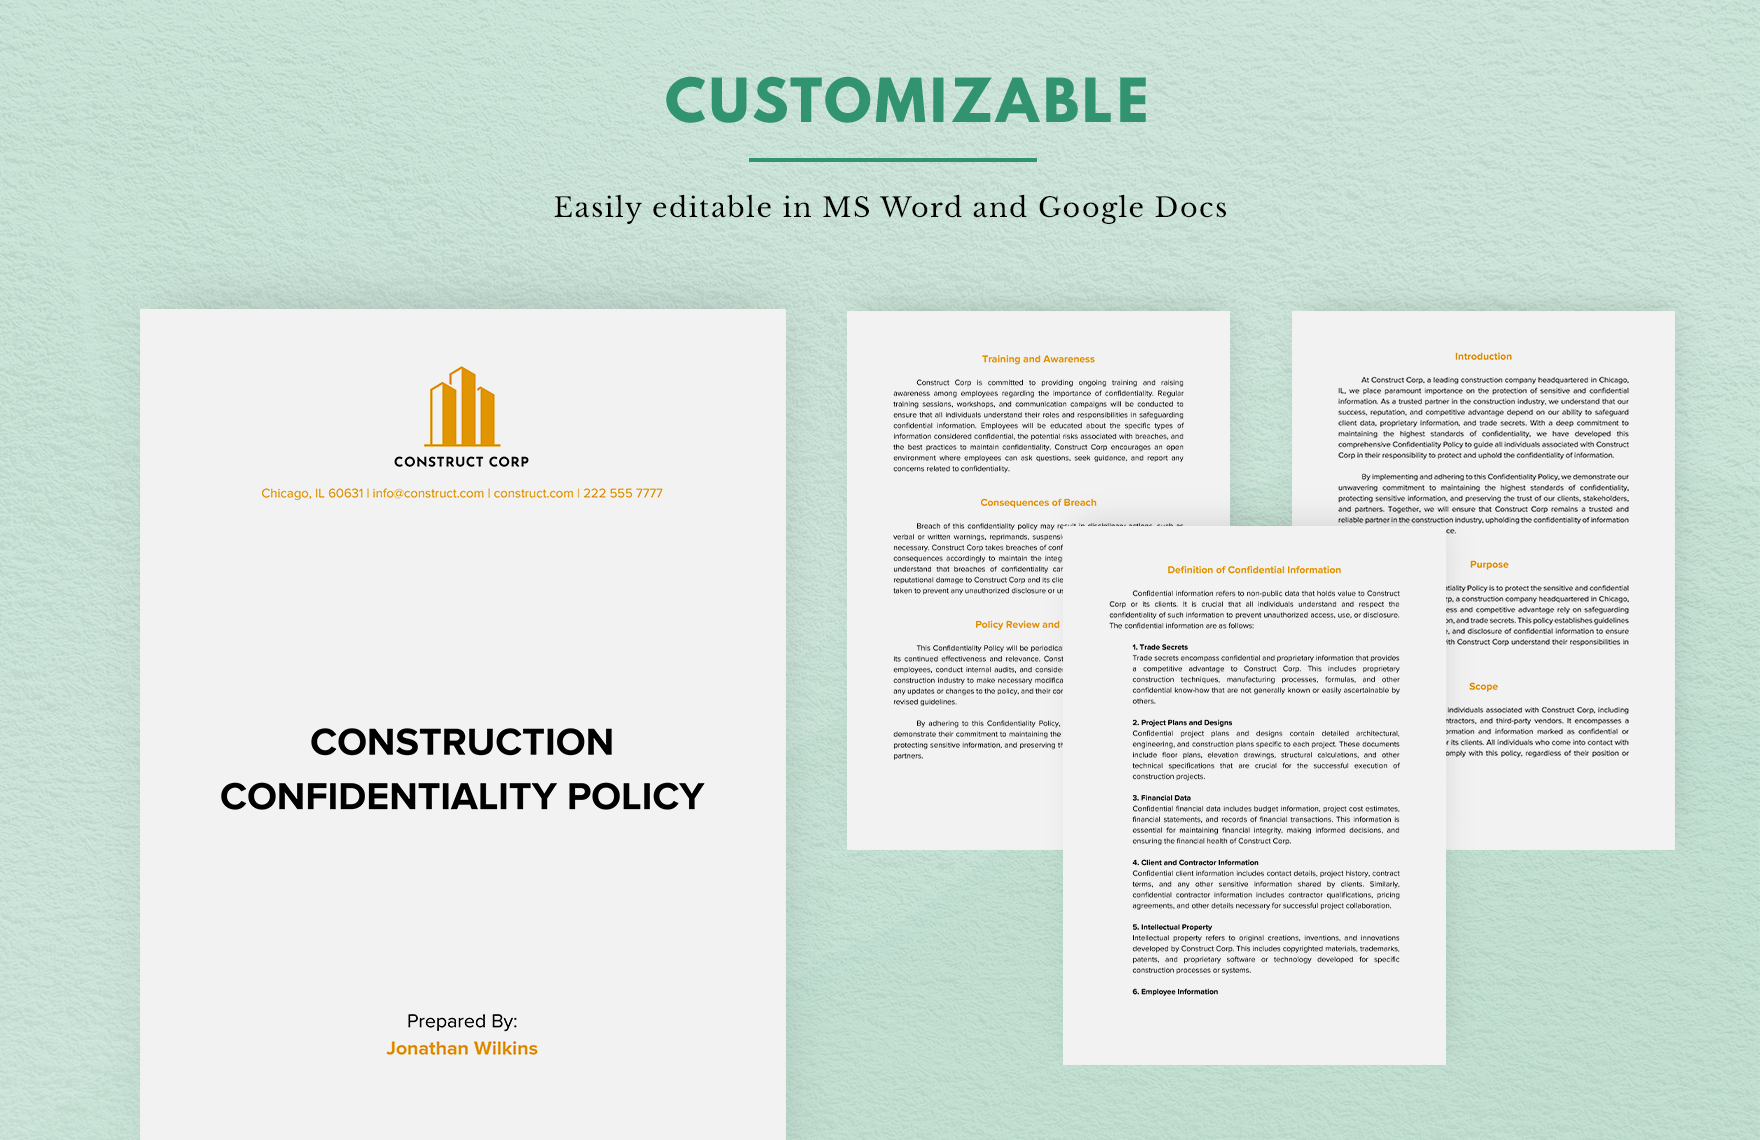 Construction Confidentiality Policy Template